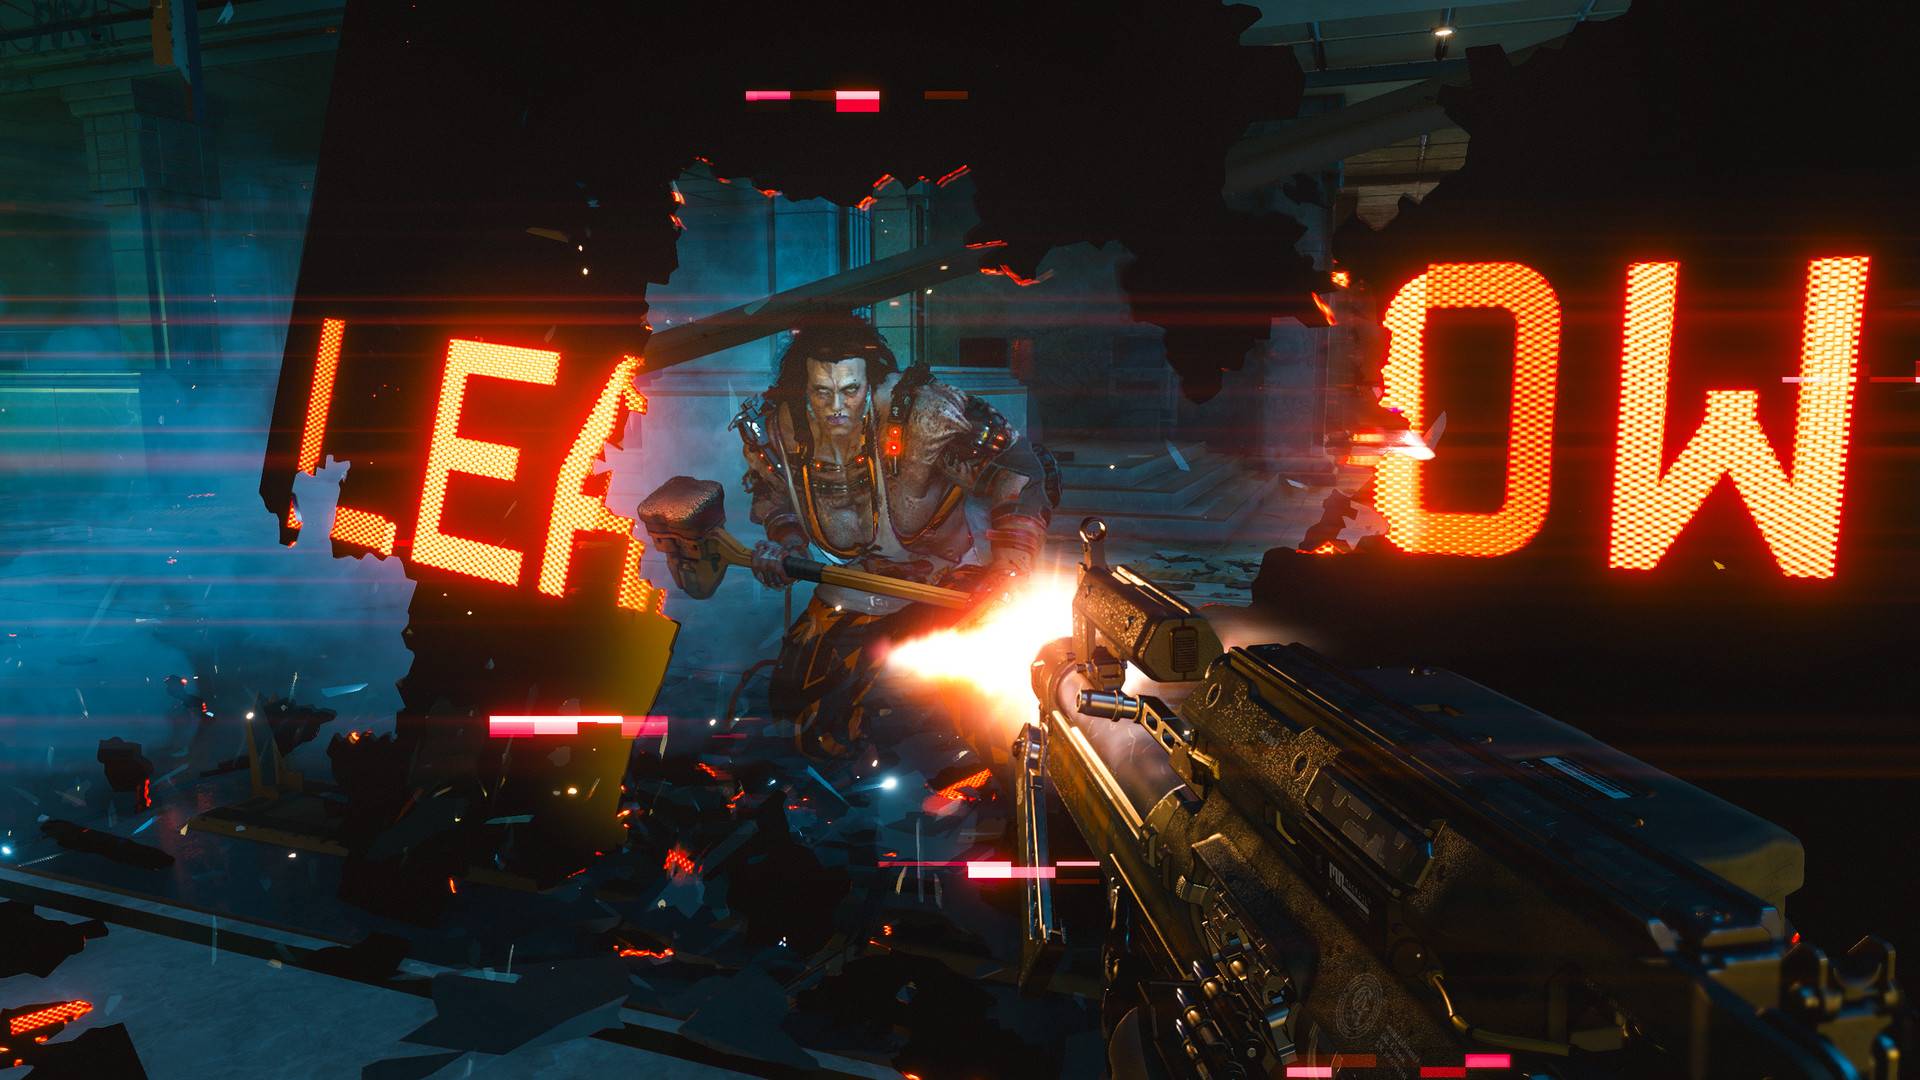 Easily Fix The Controller Default Options In Cyberpunk 2077 On PC